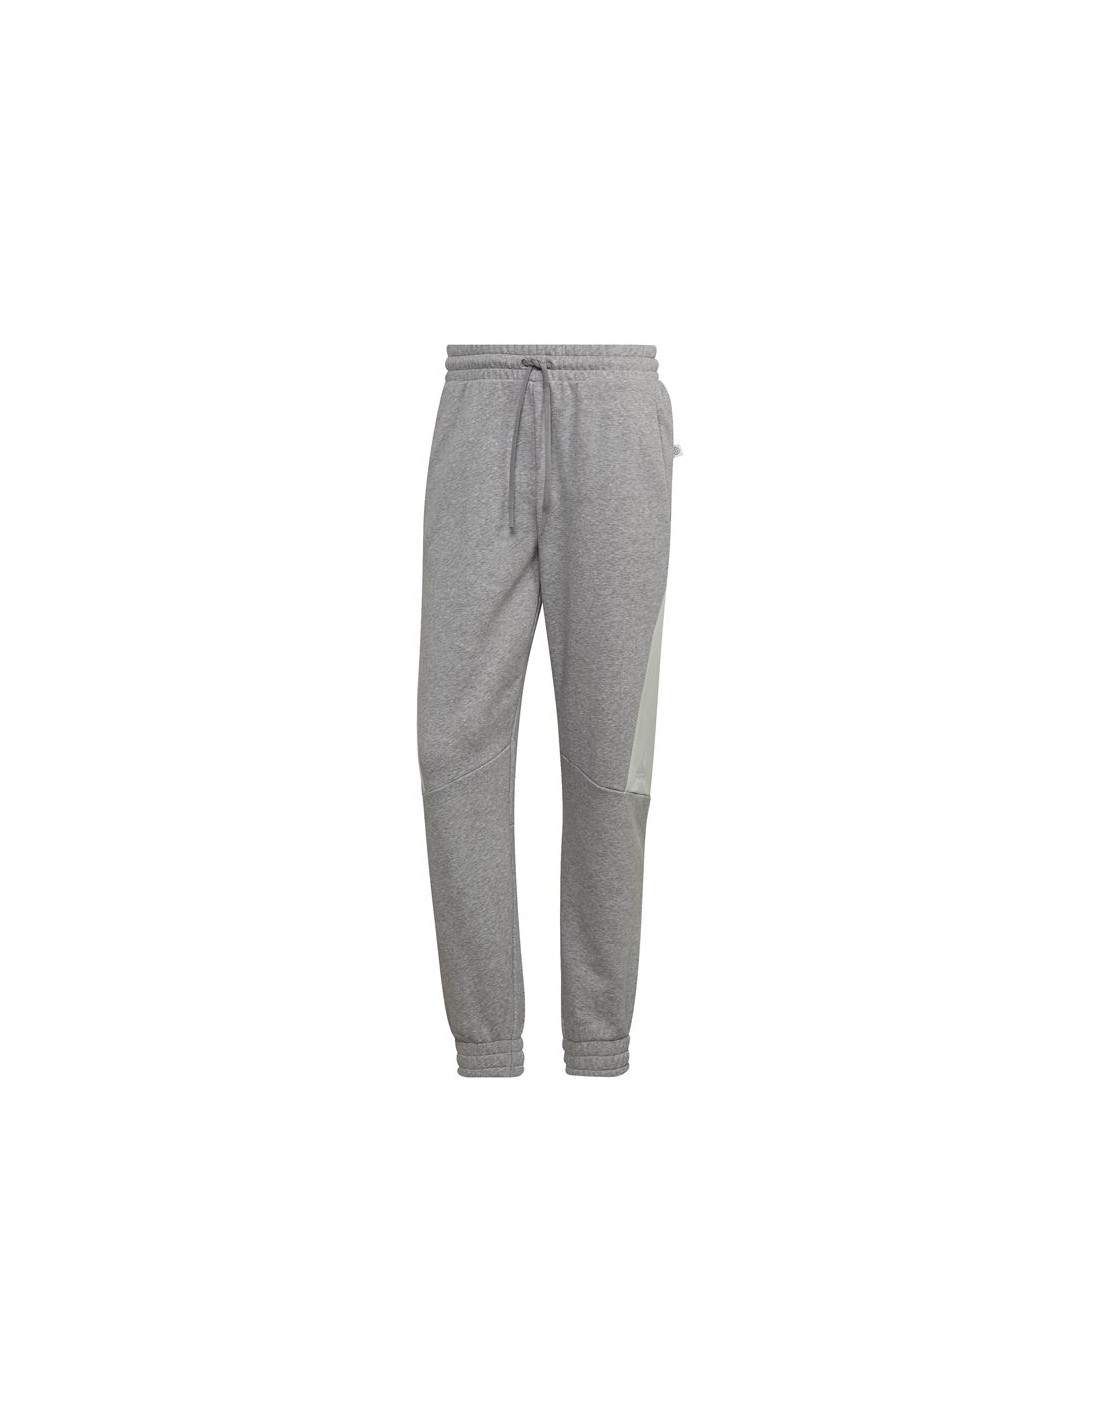 Pantalones adidas future icons embroidered hombre grey